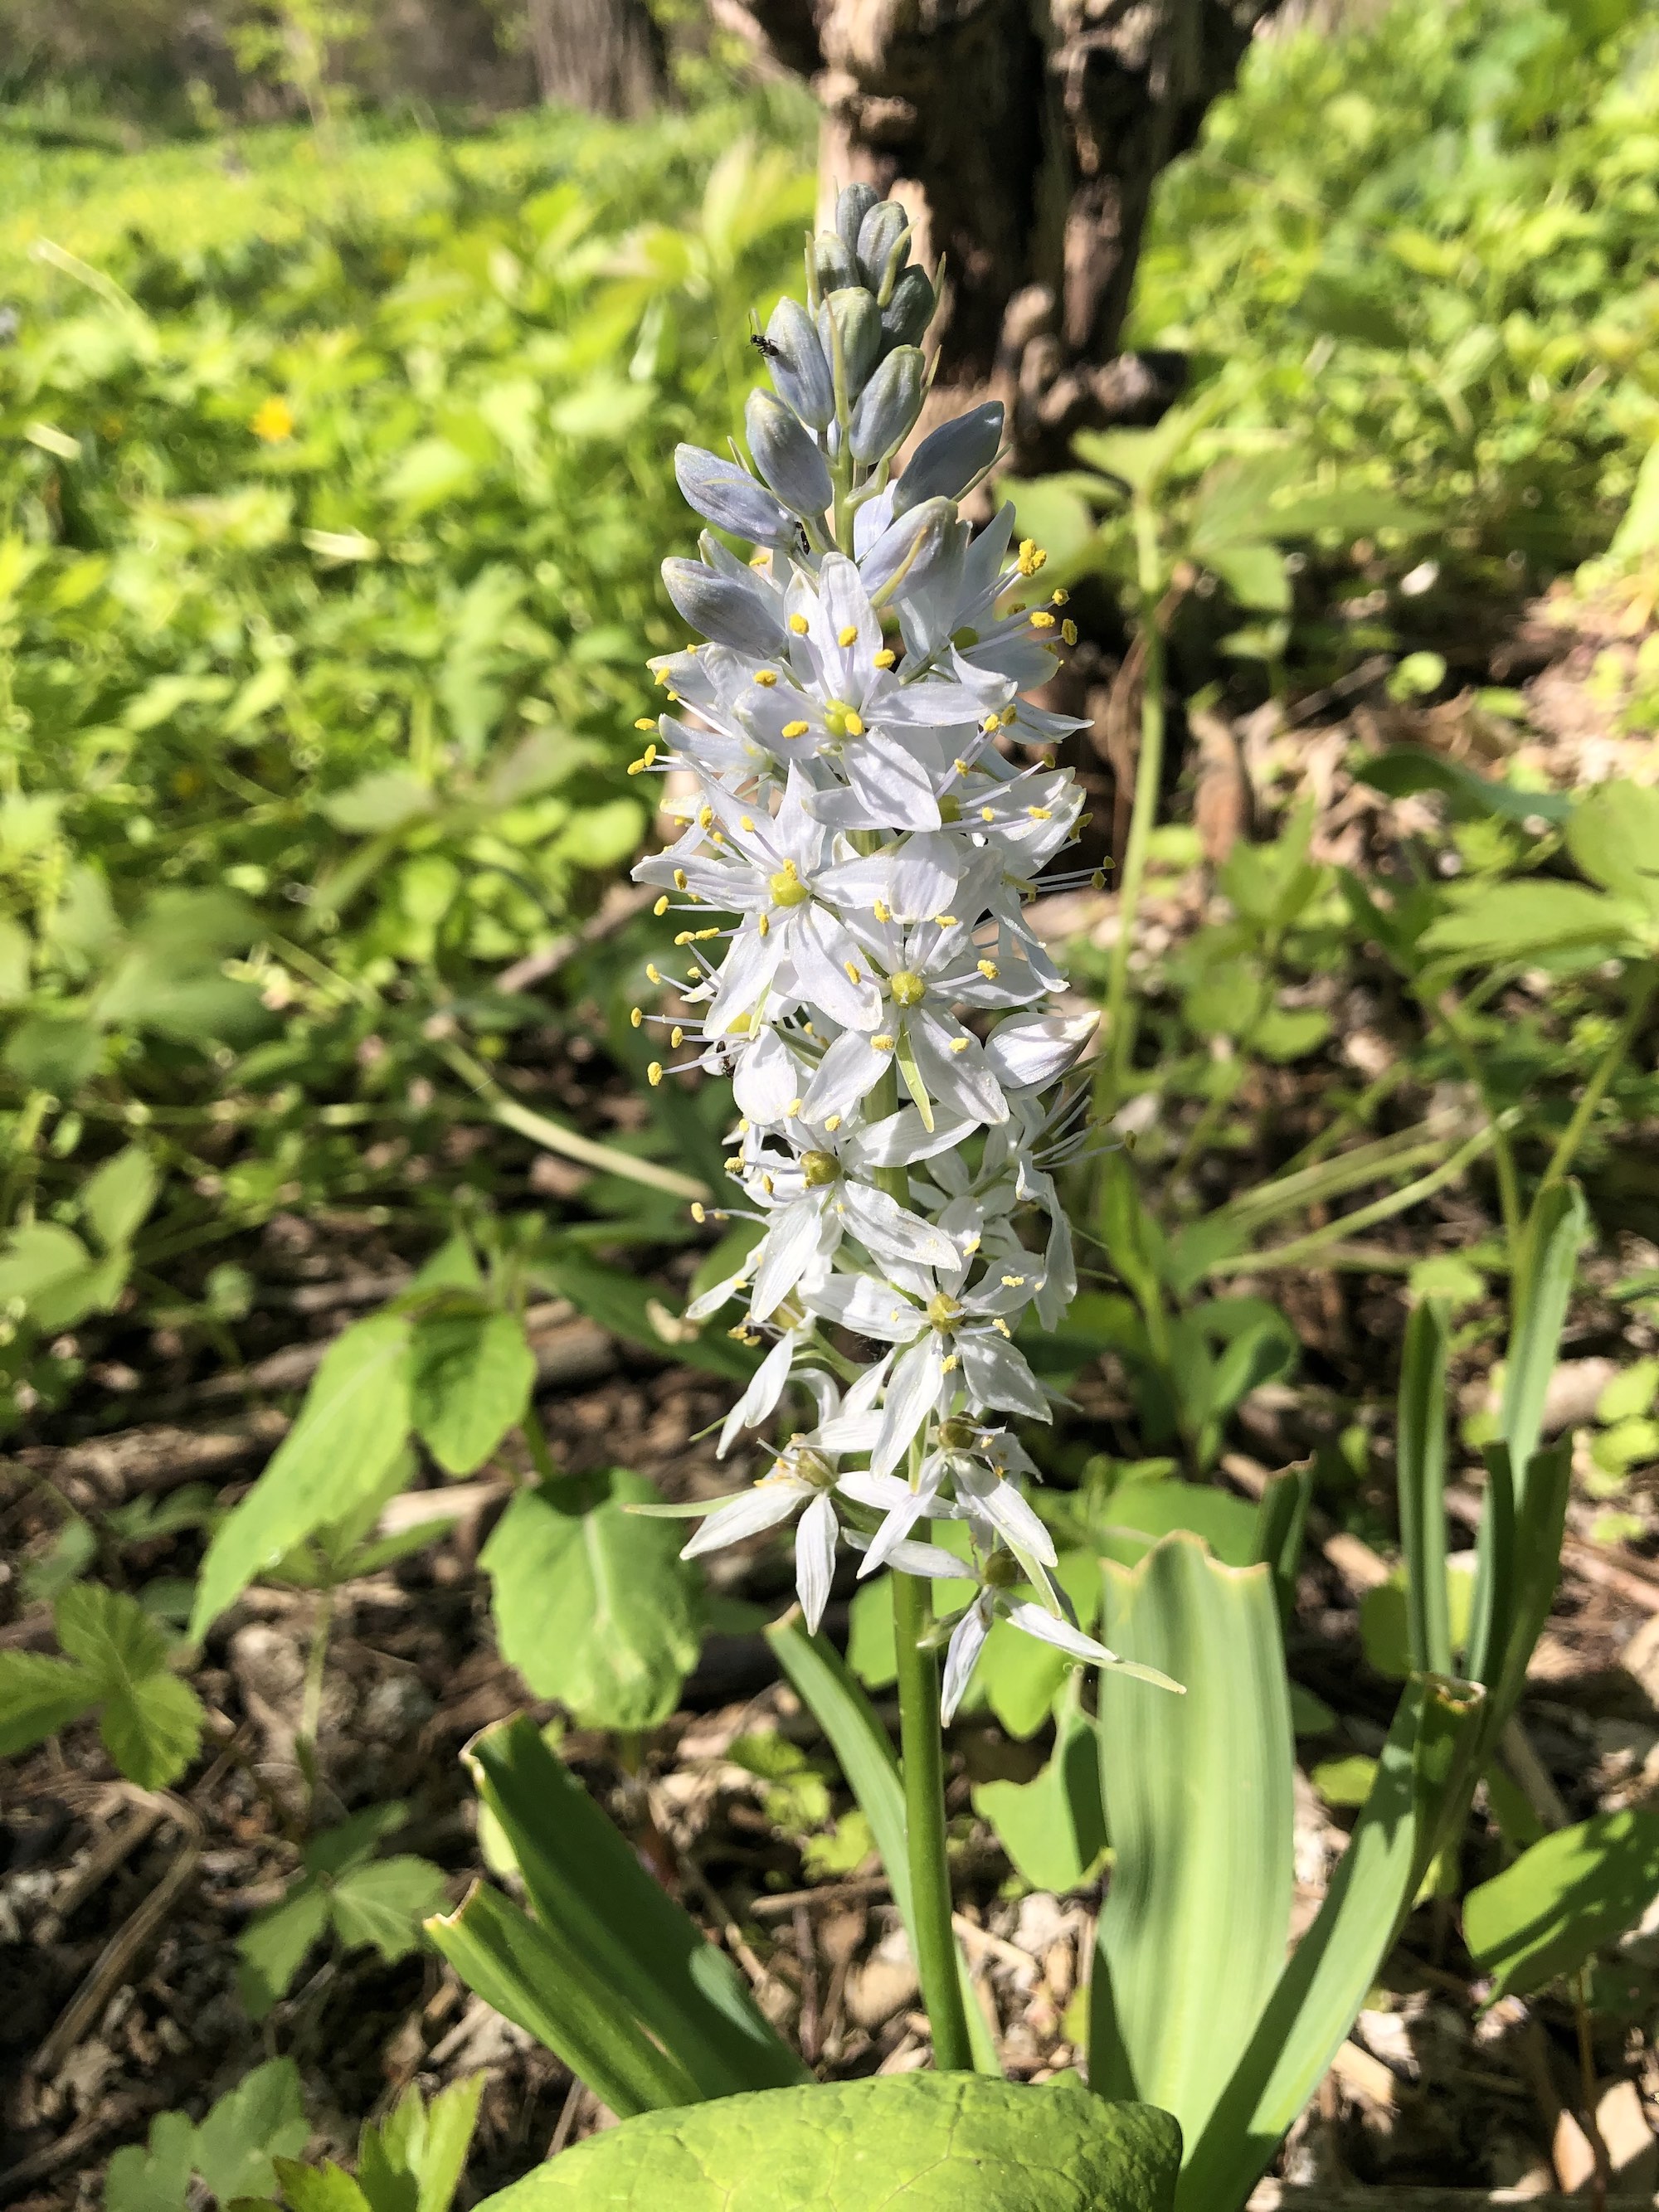 Wild Hyacinth by Council Ring in Oak Savanna on May 12, 2021.